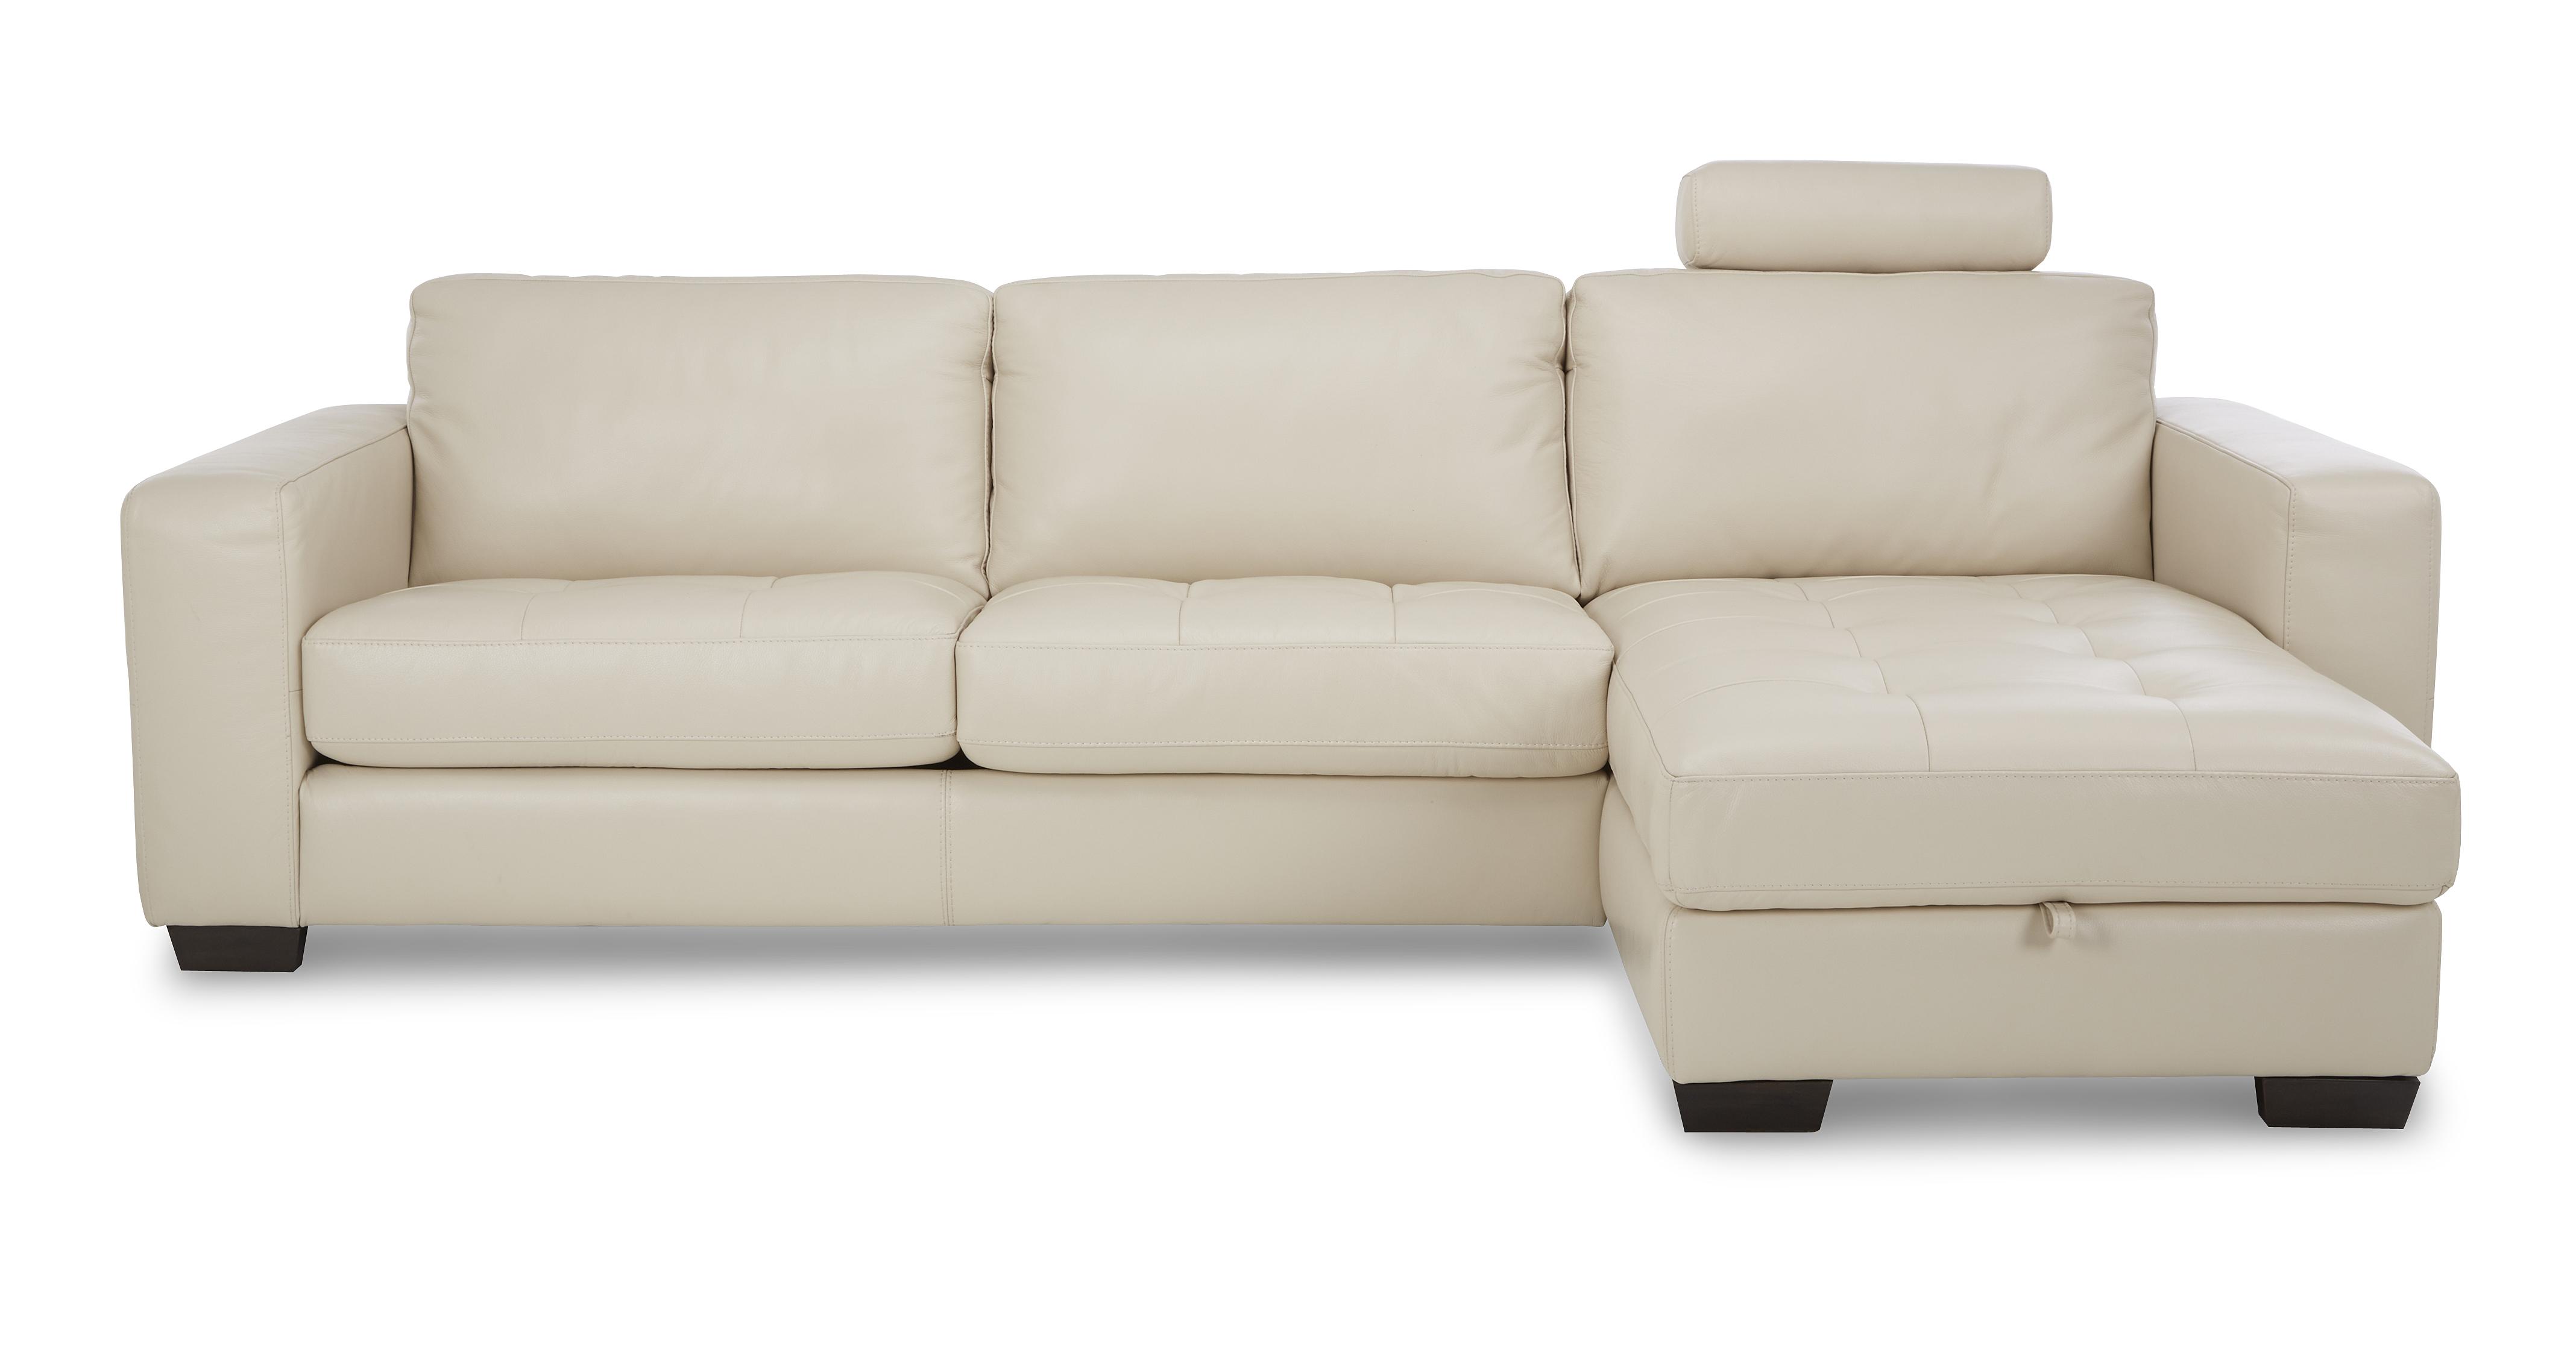 DFS Ramona Bisque Leather Set Inc Storage Chaise Sofa Bed, Chair ...